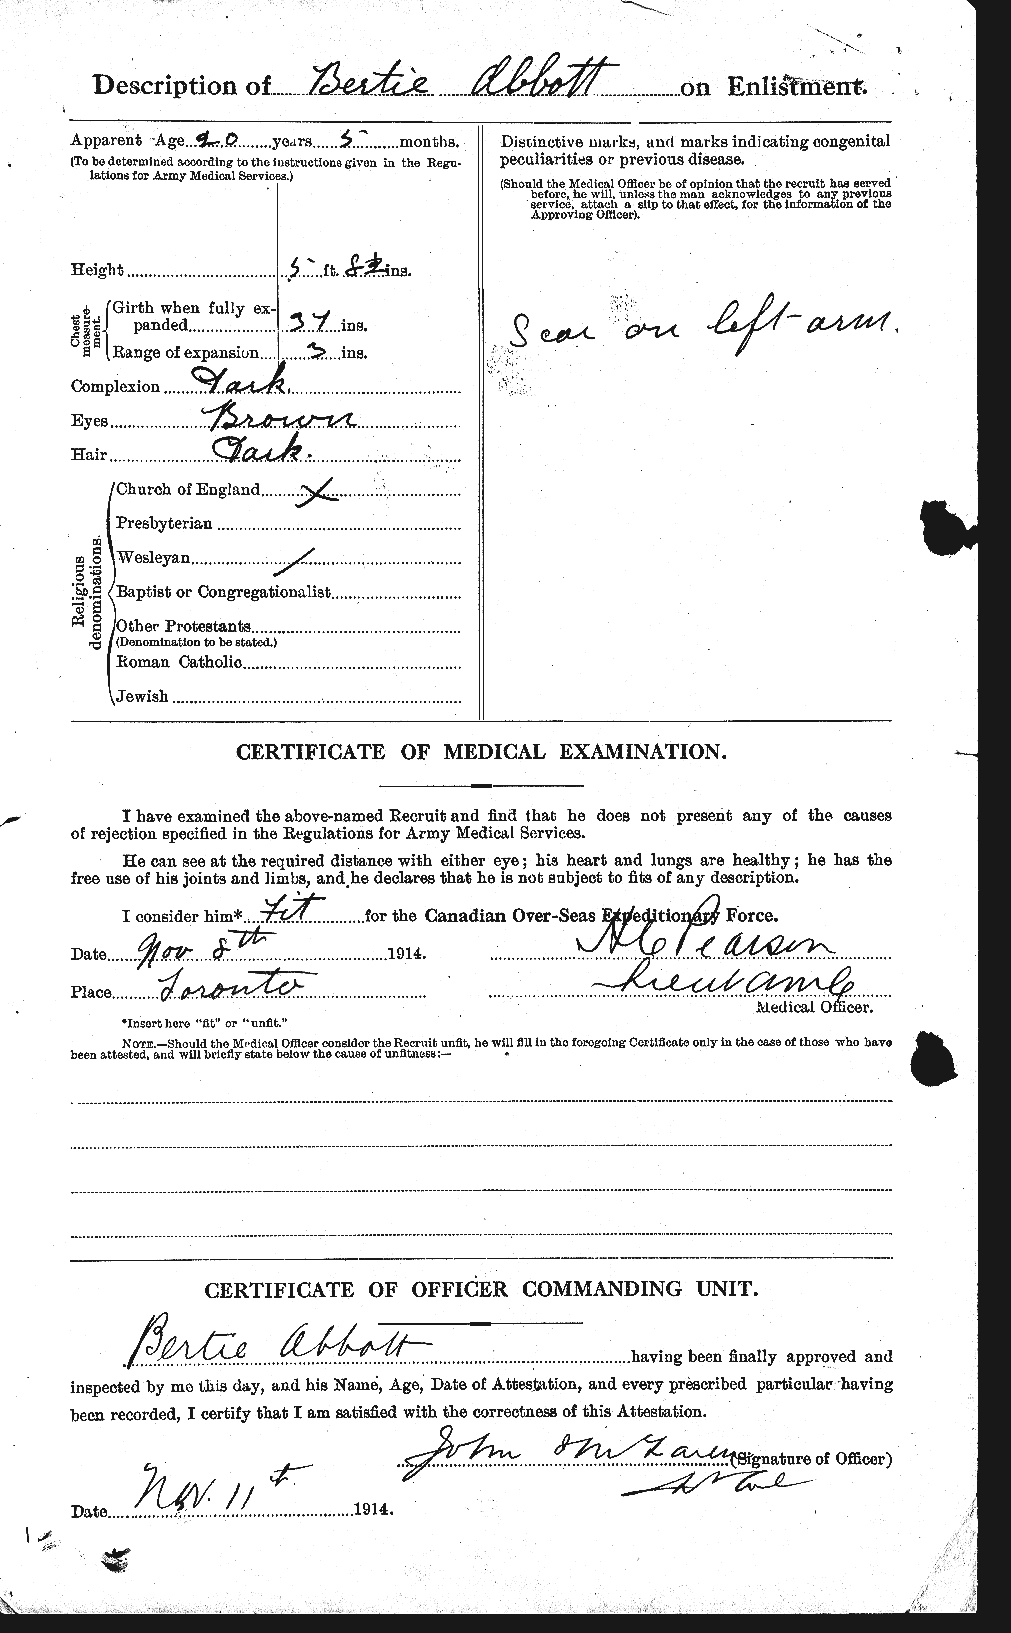 Personnel Records of the First World War - CEF 200821b